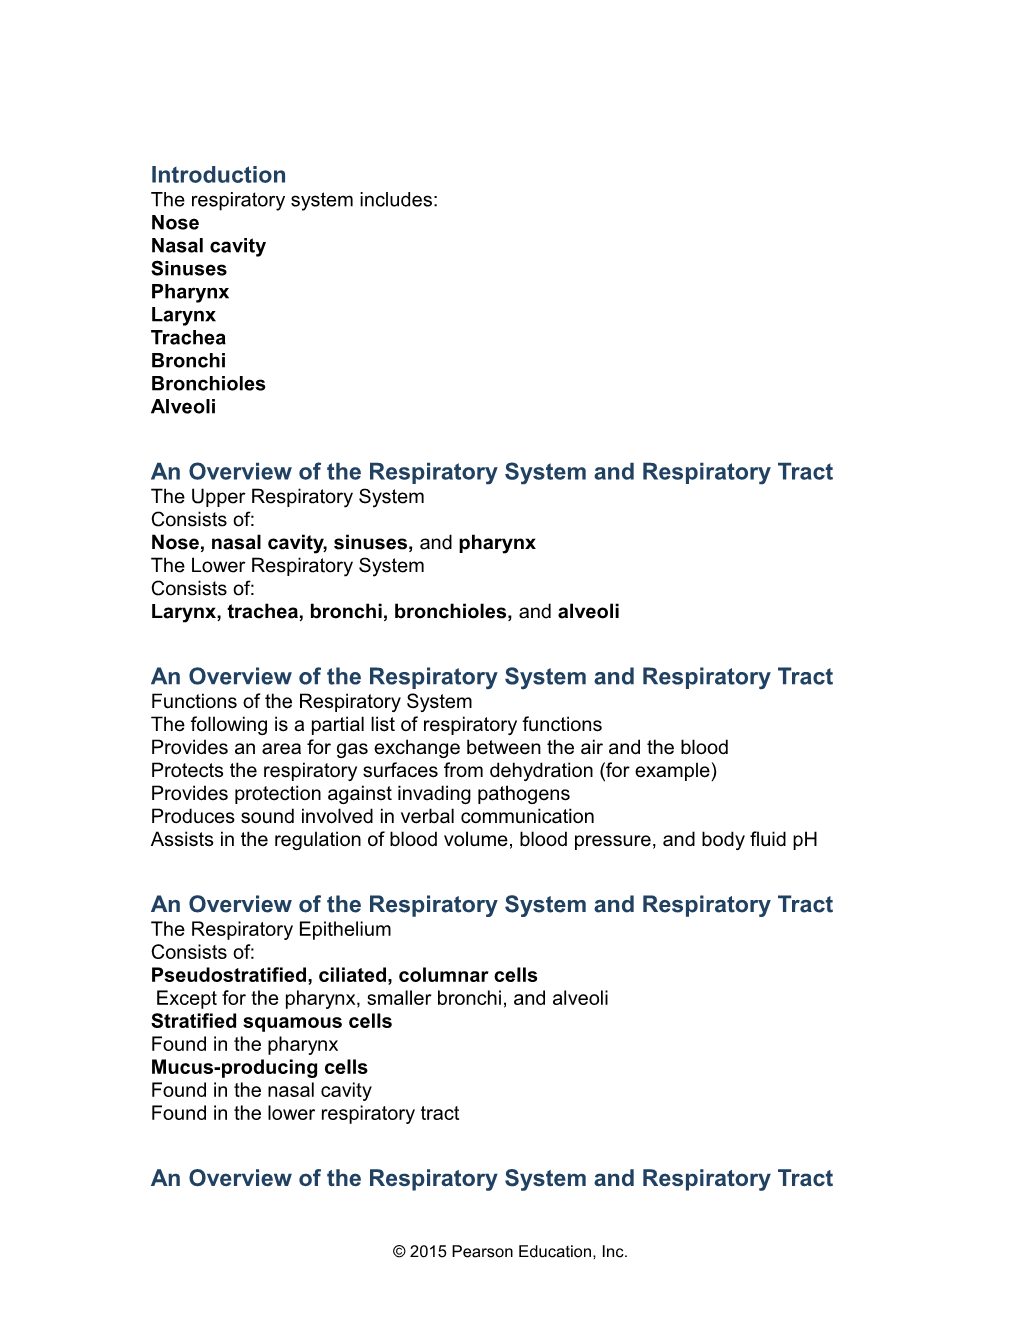 An Overview of the Respiratory System and Respiratory Tract